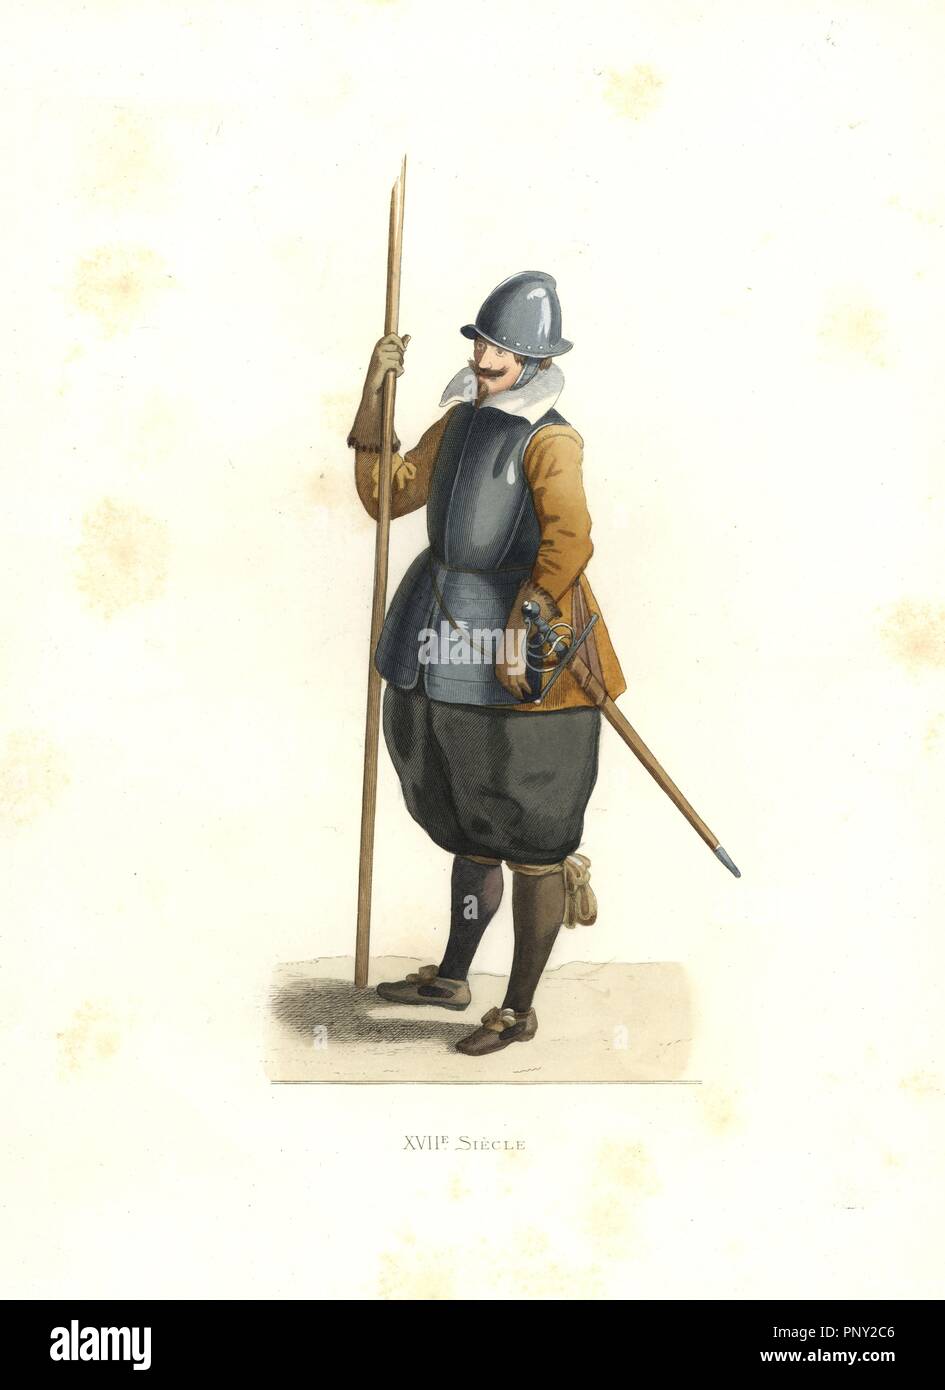 Pikeman, French Flanders, 17th century. Handcolored illustration by E. Lechevallier-Chevignard, lithographed by A. Didier, L. Flameng, F. Laguillermie, from Georges Duplessis's 'Costumes historiques des XVIe, XVIIe et XVIIIe siecles' (Historical costumes of the 16th, 17th and 18th centuries), Paris 1867. The book was a continuation of the series on the costumes of the 12th to 15th centuries published by Camille Bonnard and Paul Mercuri from 1830. Georges Duplessis (1834-1899) was curator of the Prints department at the Bibliotheque nationale. Edmond Lechevallier-Chevignard (1825-1902) was an a Stock Photo